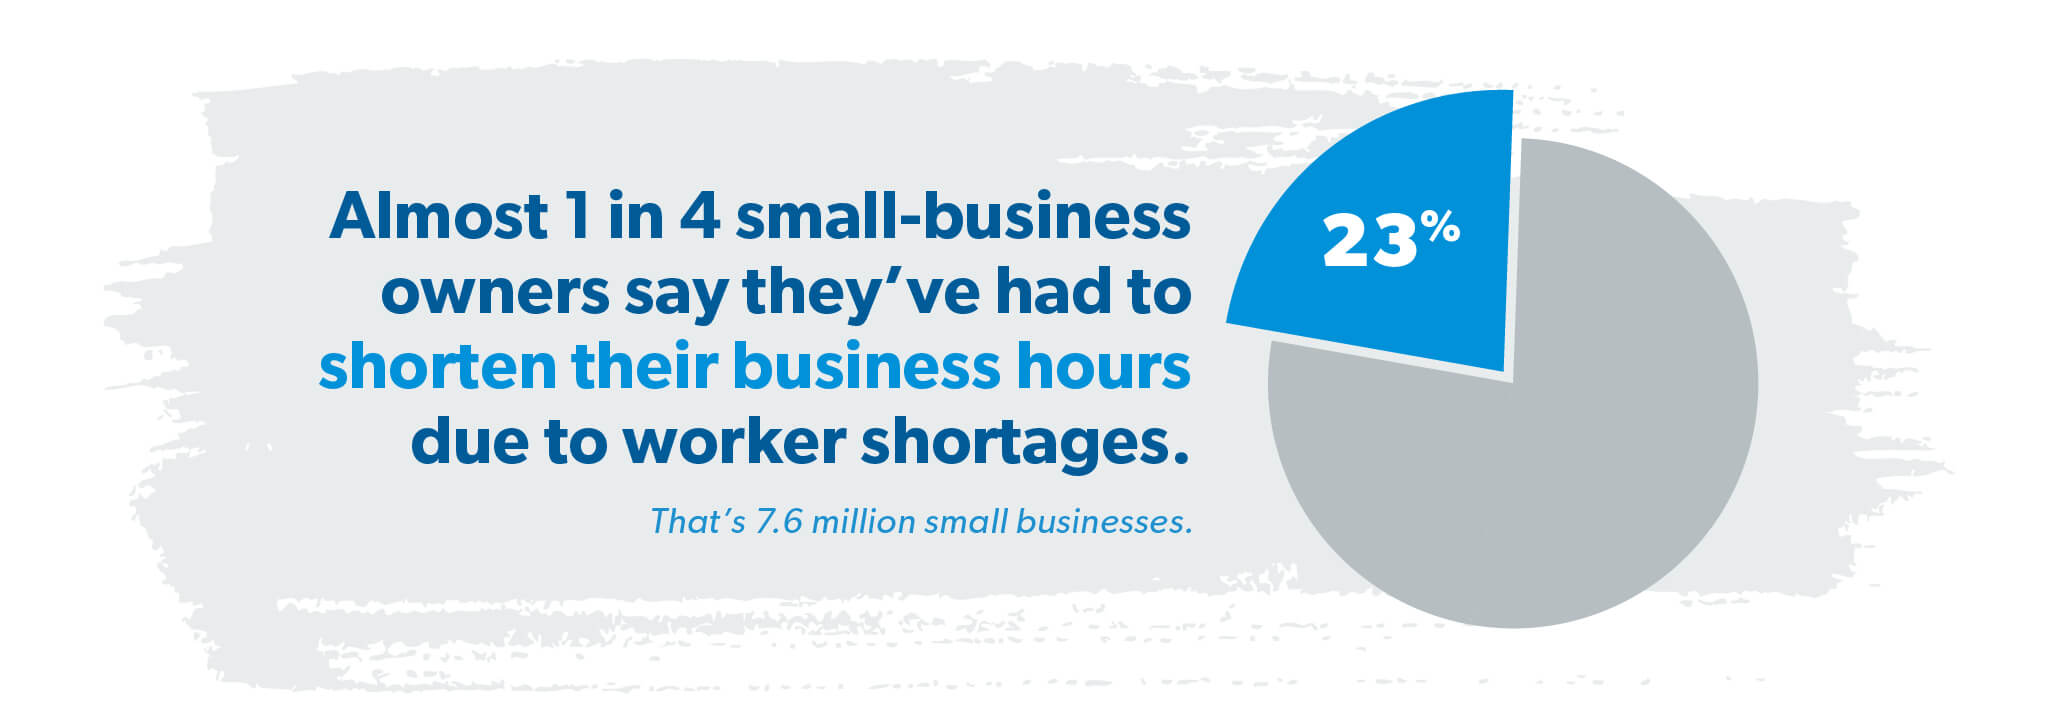 almost 1 in 4 small-business owners say they've had to shorten their business hours due to worker shortages